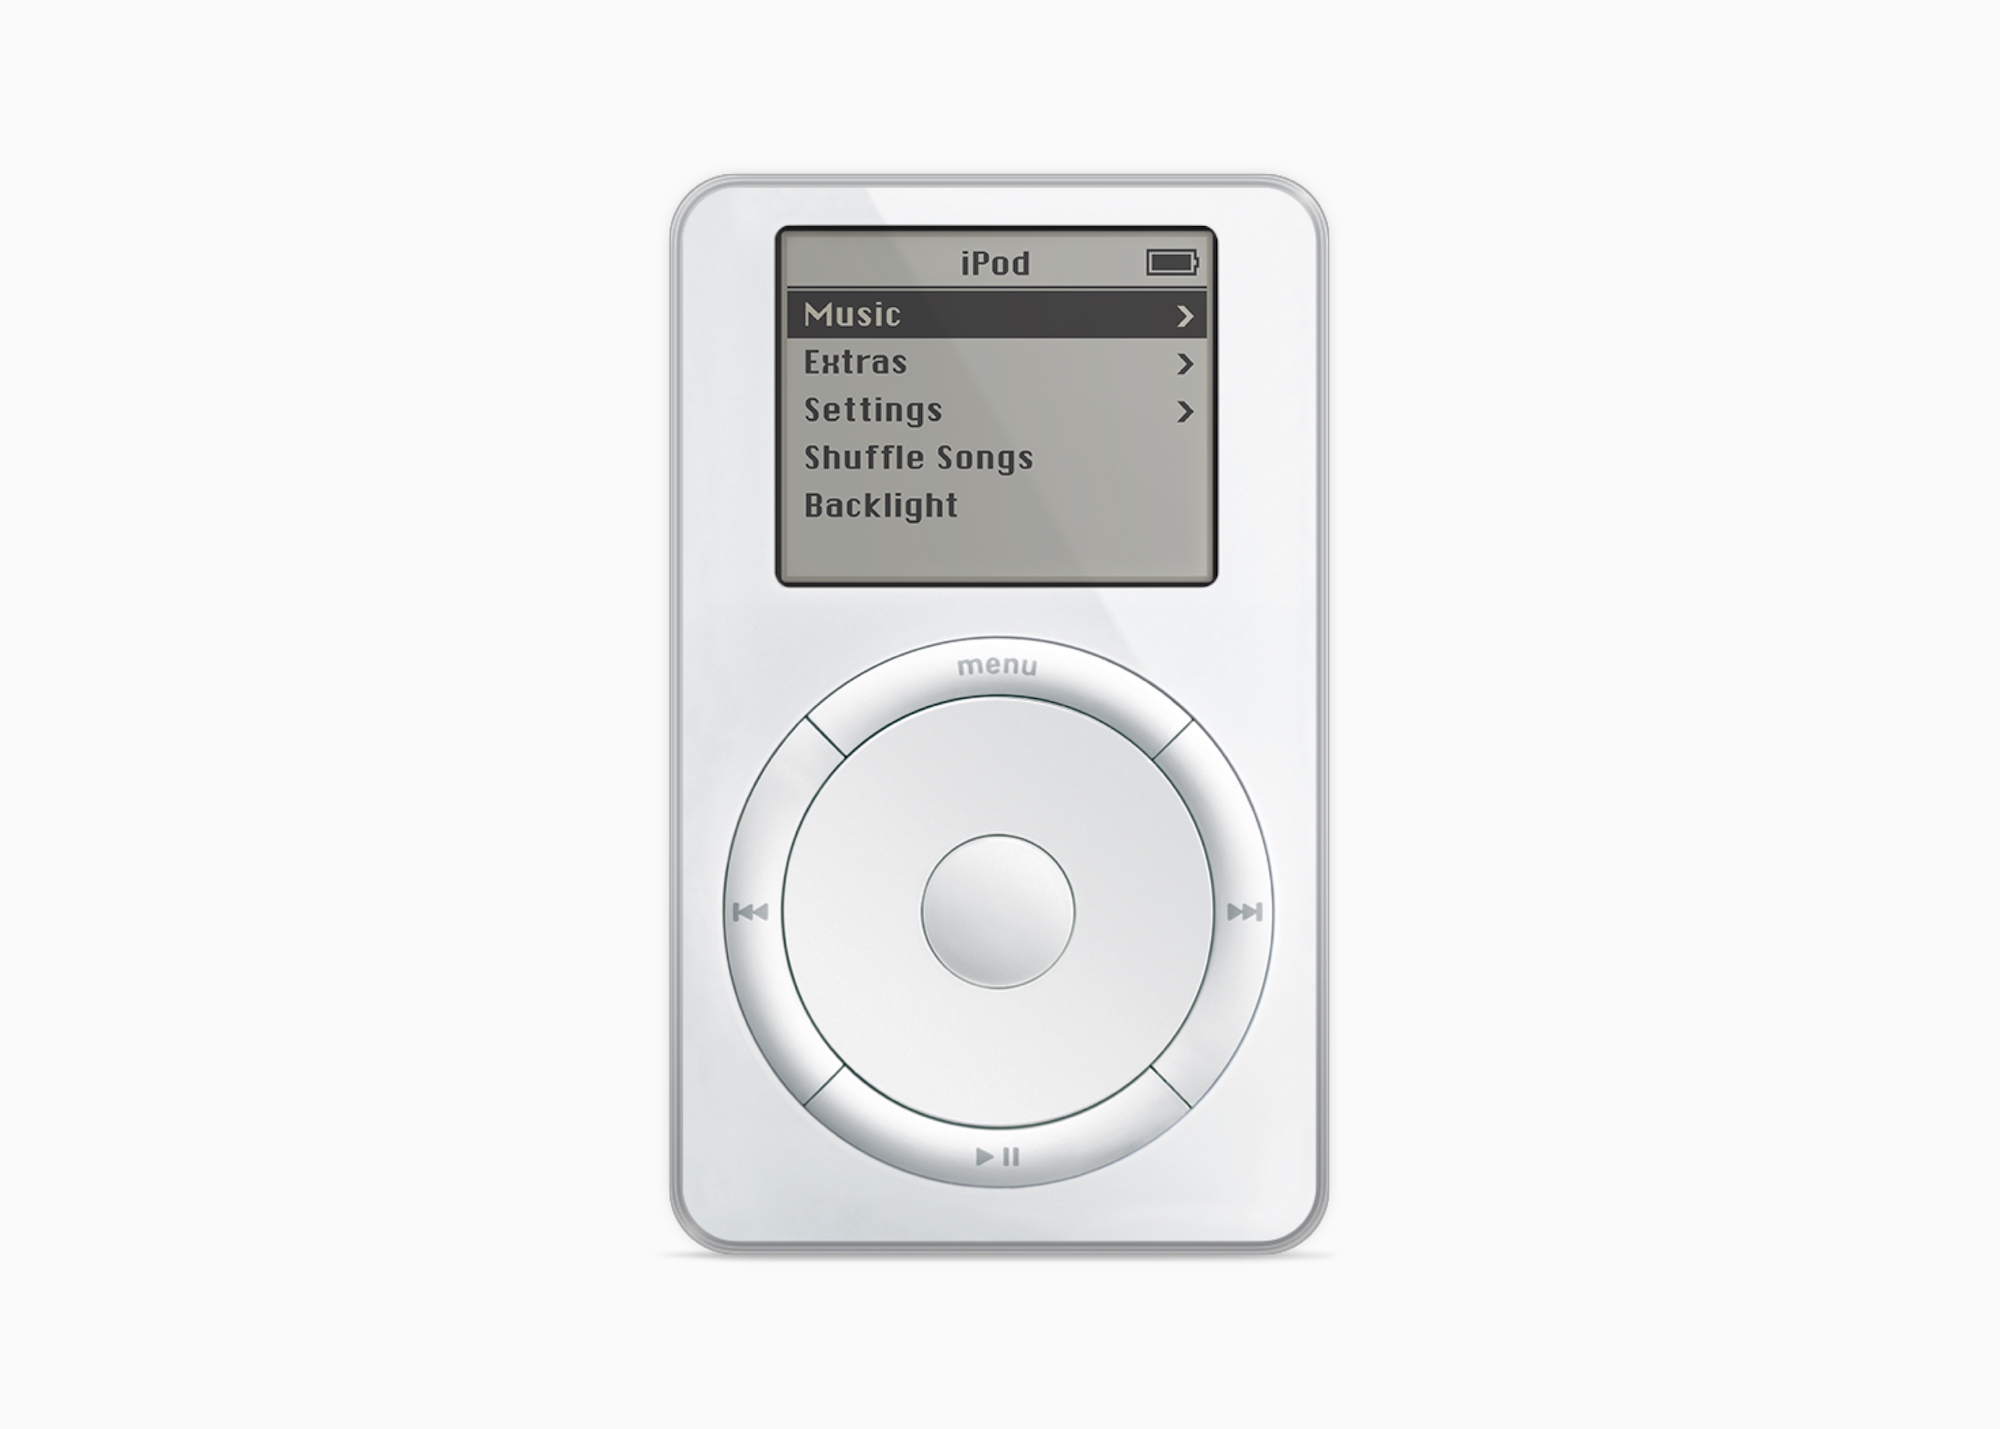 There are 3 revolutionary iPod models to remember